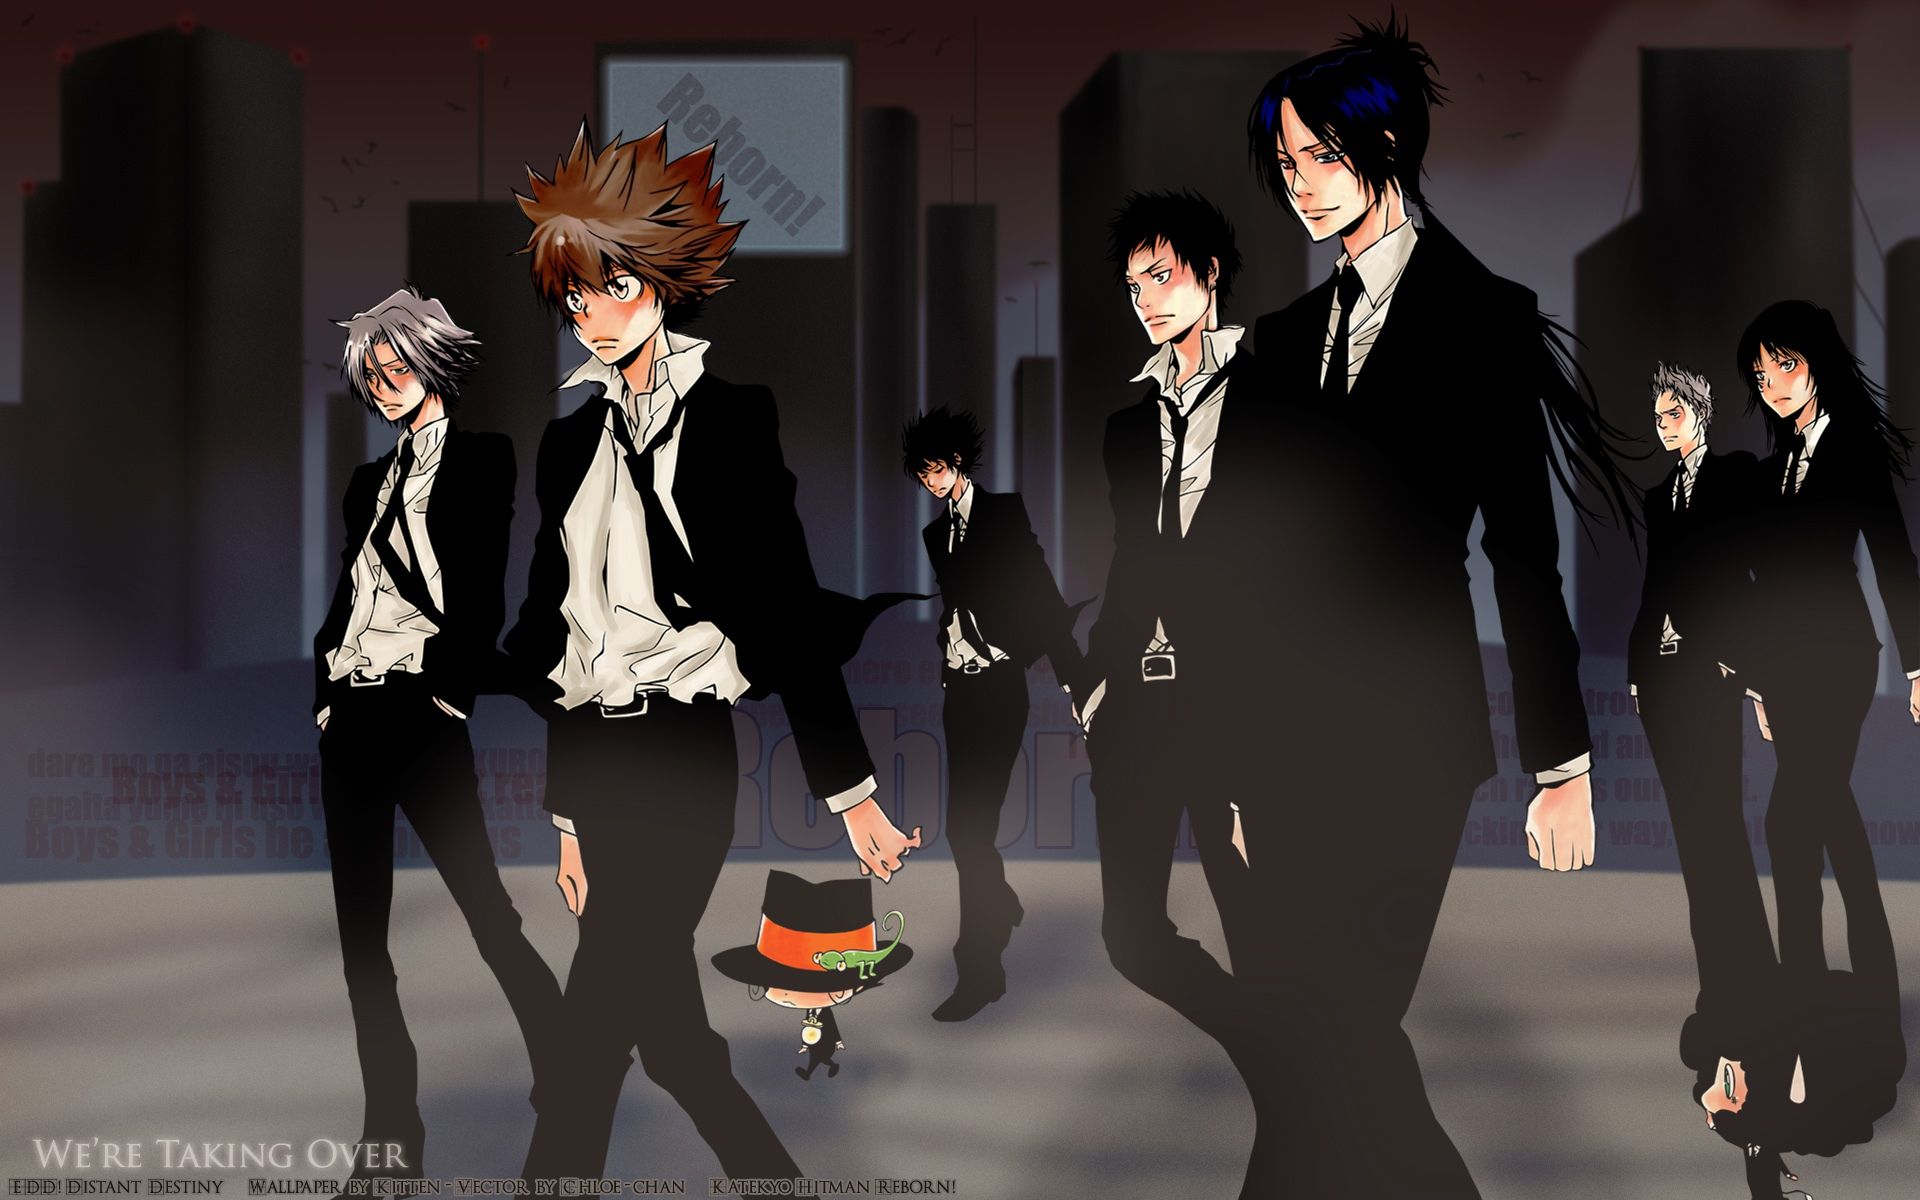 Share more than 70 mafia boss anime best - in.cdgdbentre